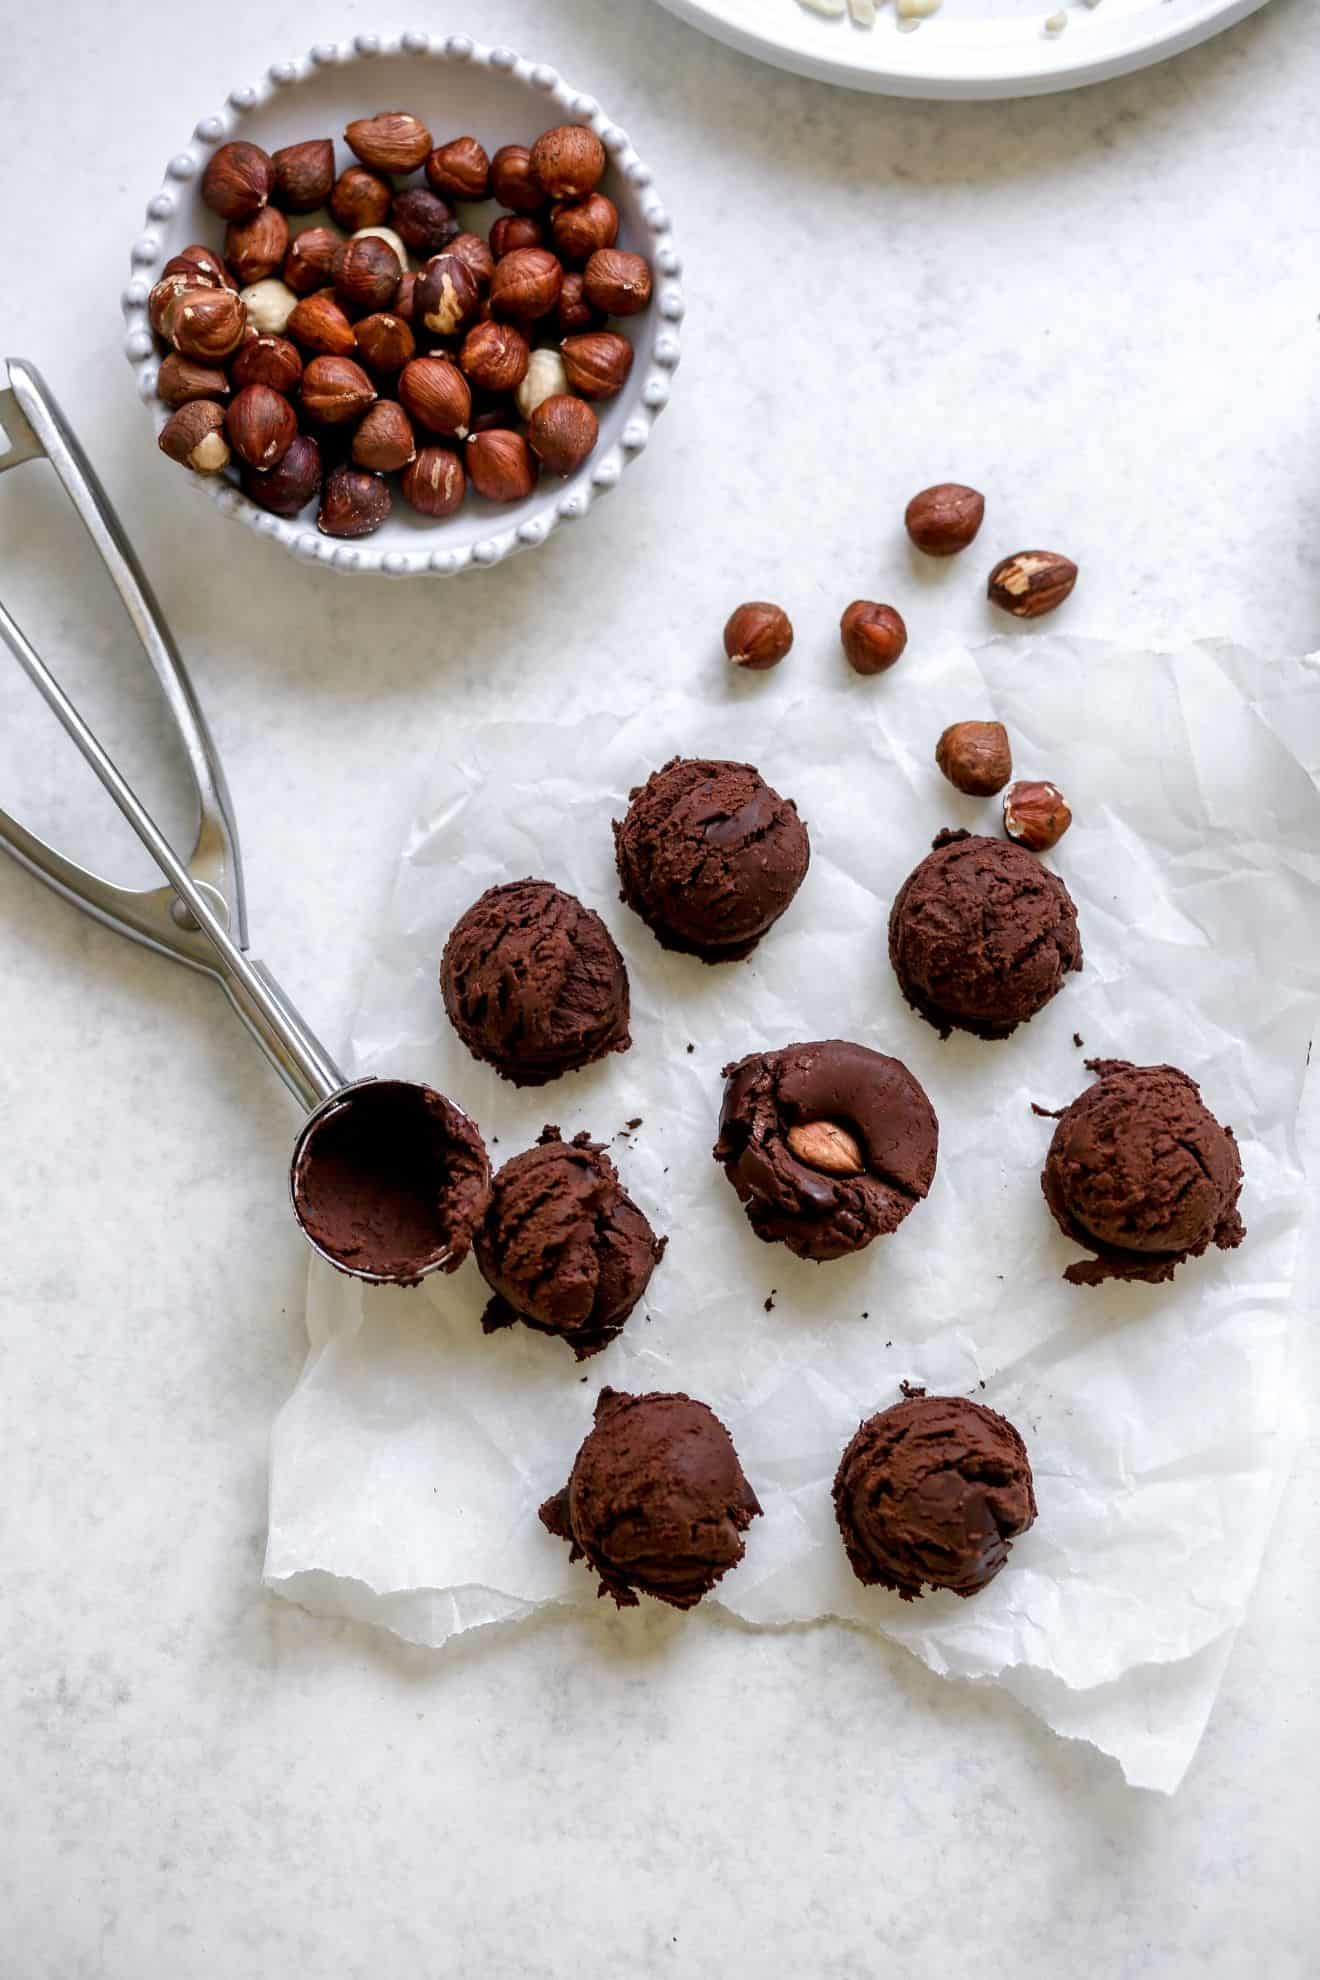 This is an overhead image looking to chocolate truffles on a white piece of parchment paper on a light grey surface. The chocolate truffles have a cookie scooper laying next to them. The center chocolate ball has a hazelnut in the middle. To the top left is a small bowl of hazelnuts.